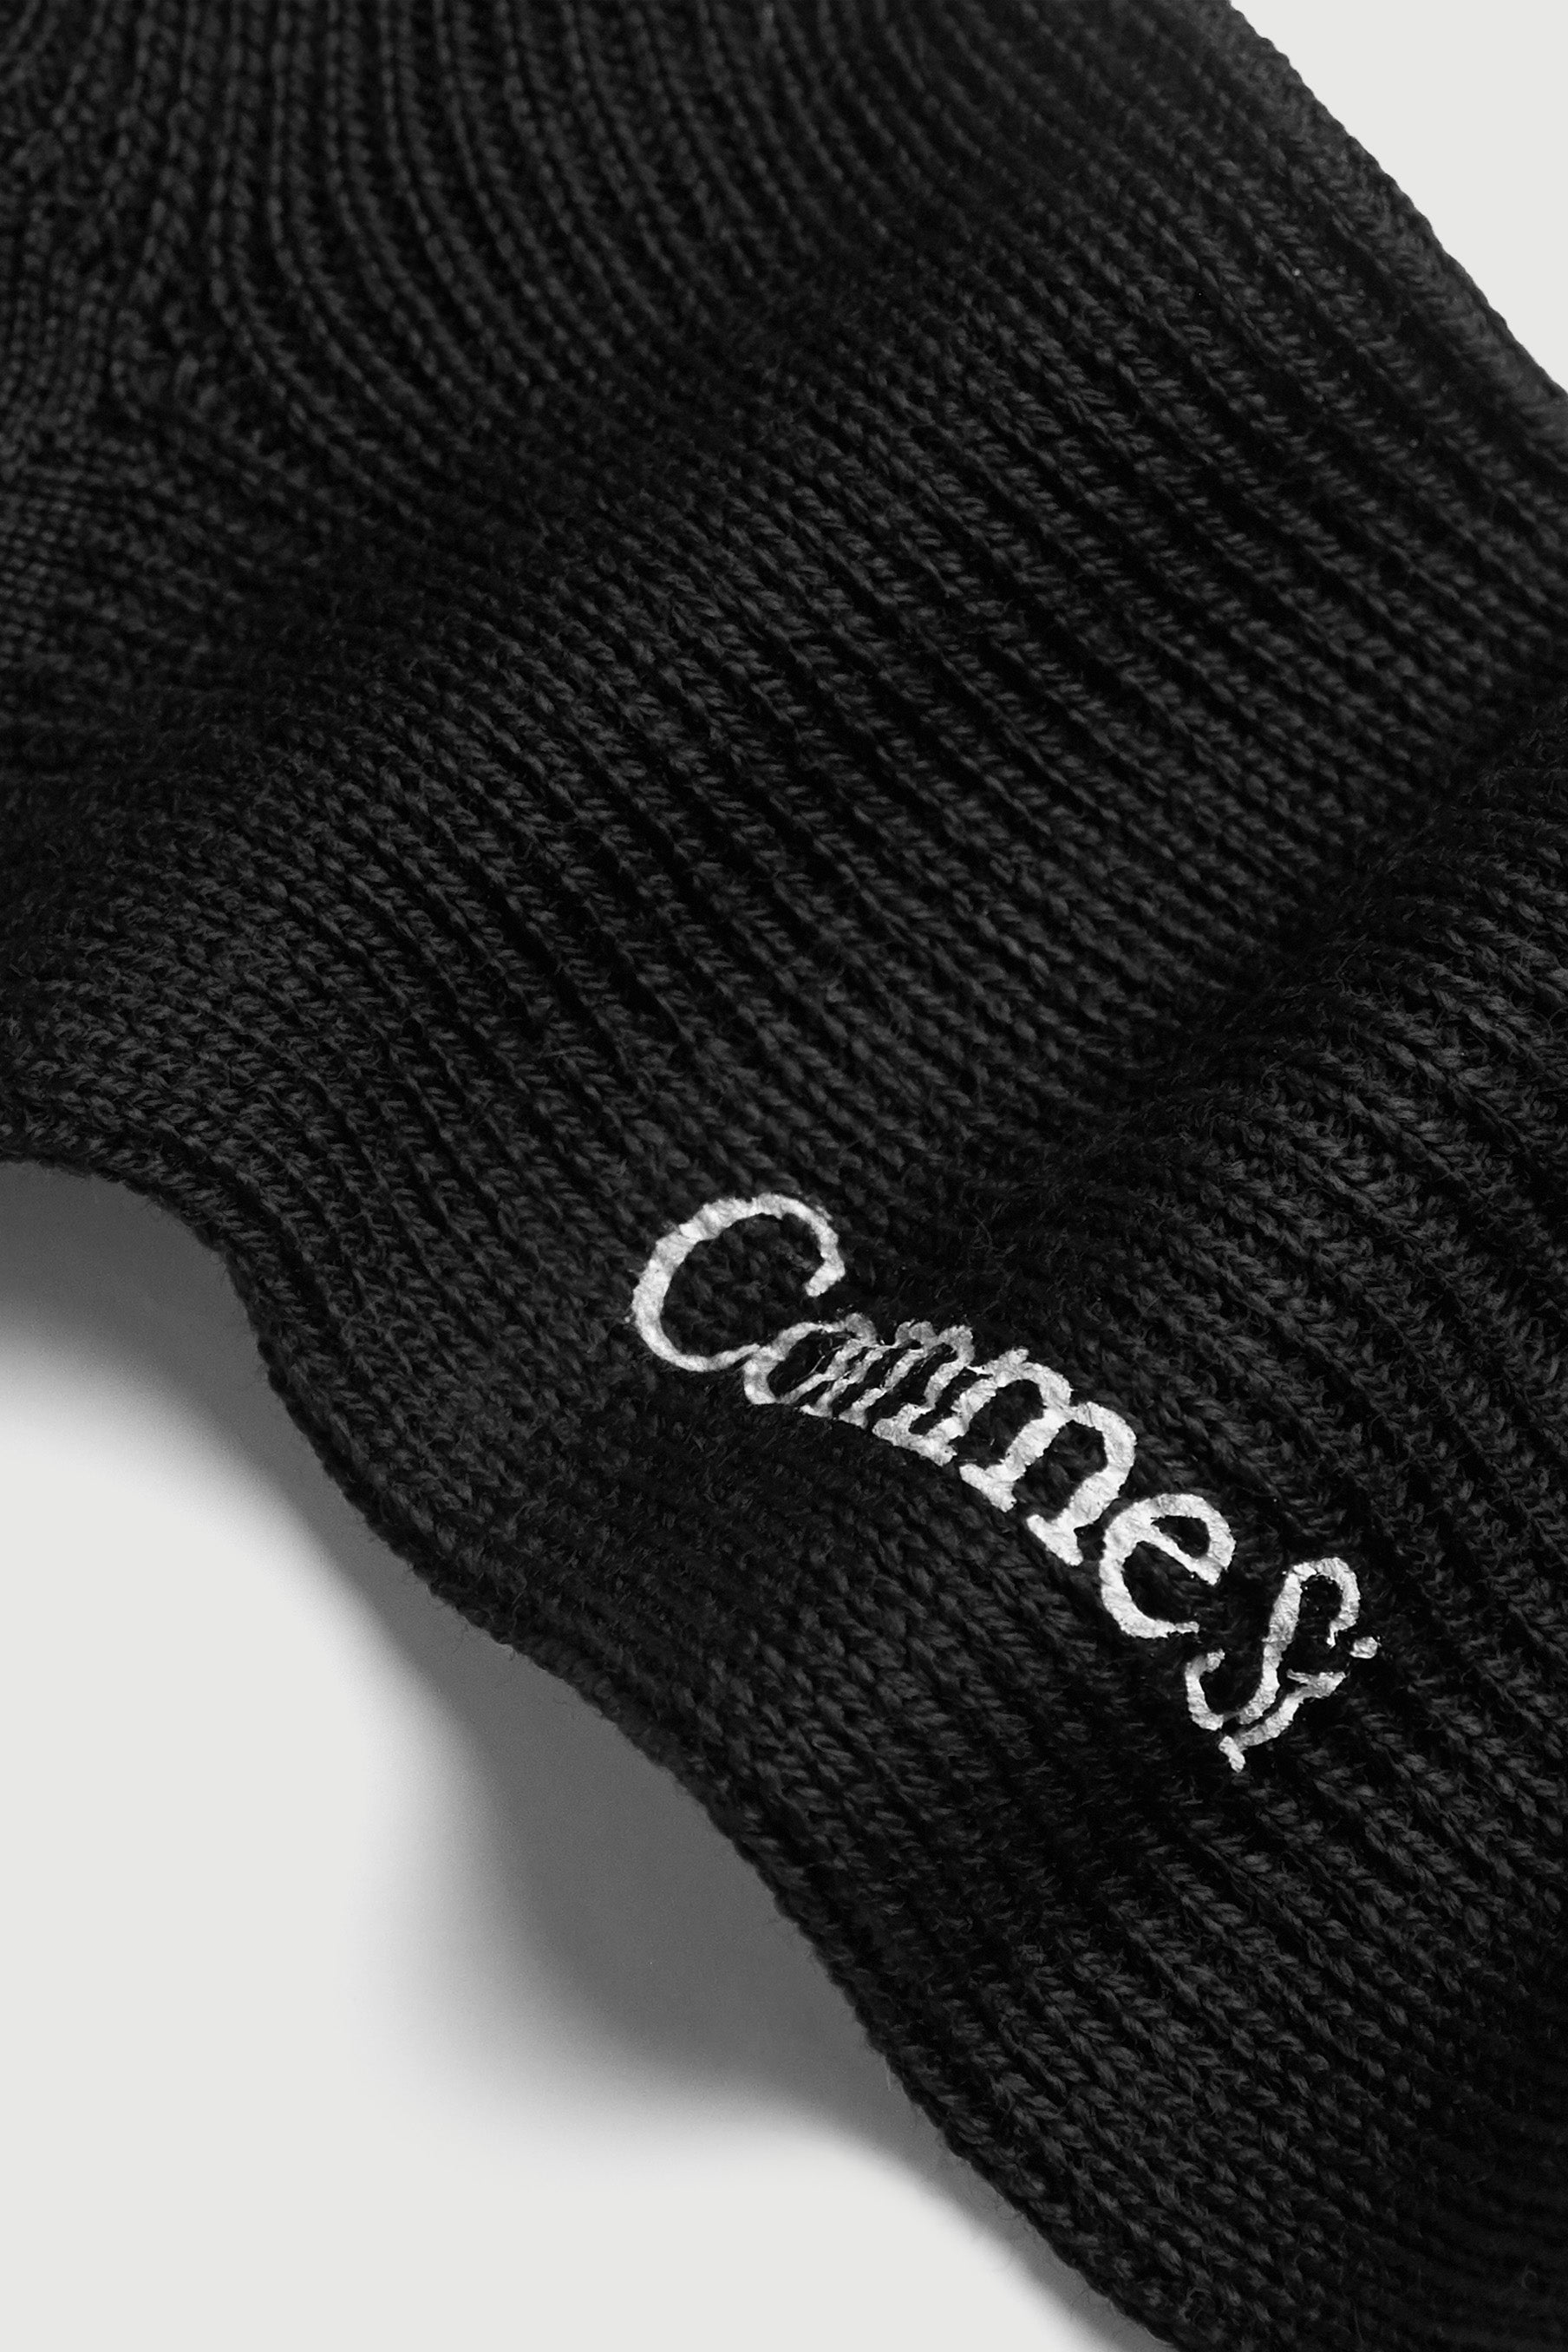 Footbed detail, The Merino Sock in Black, merino wool, by Comme Si